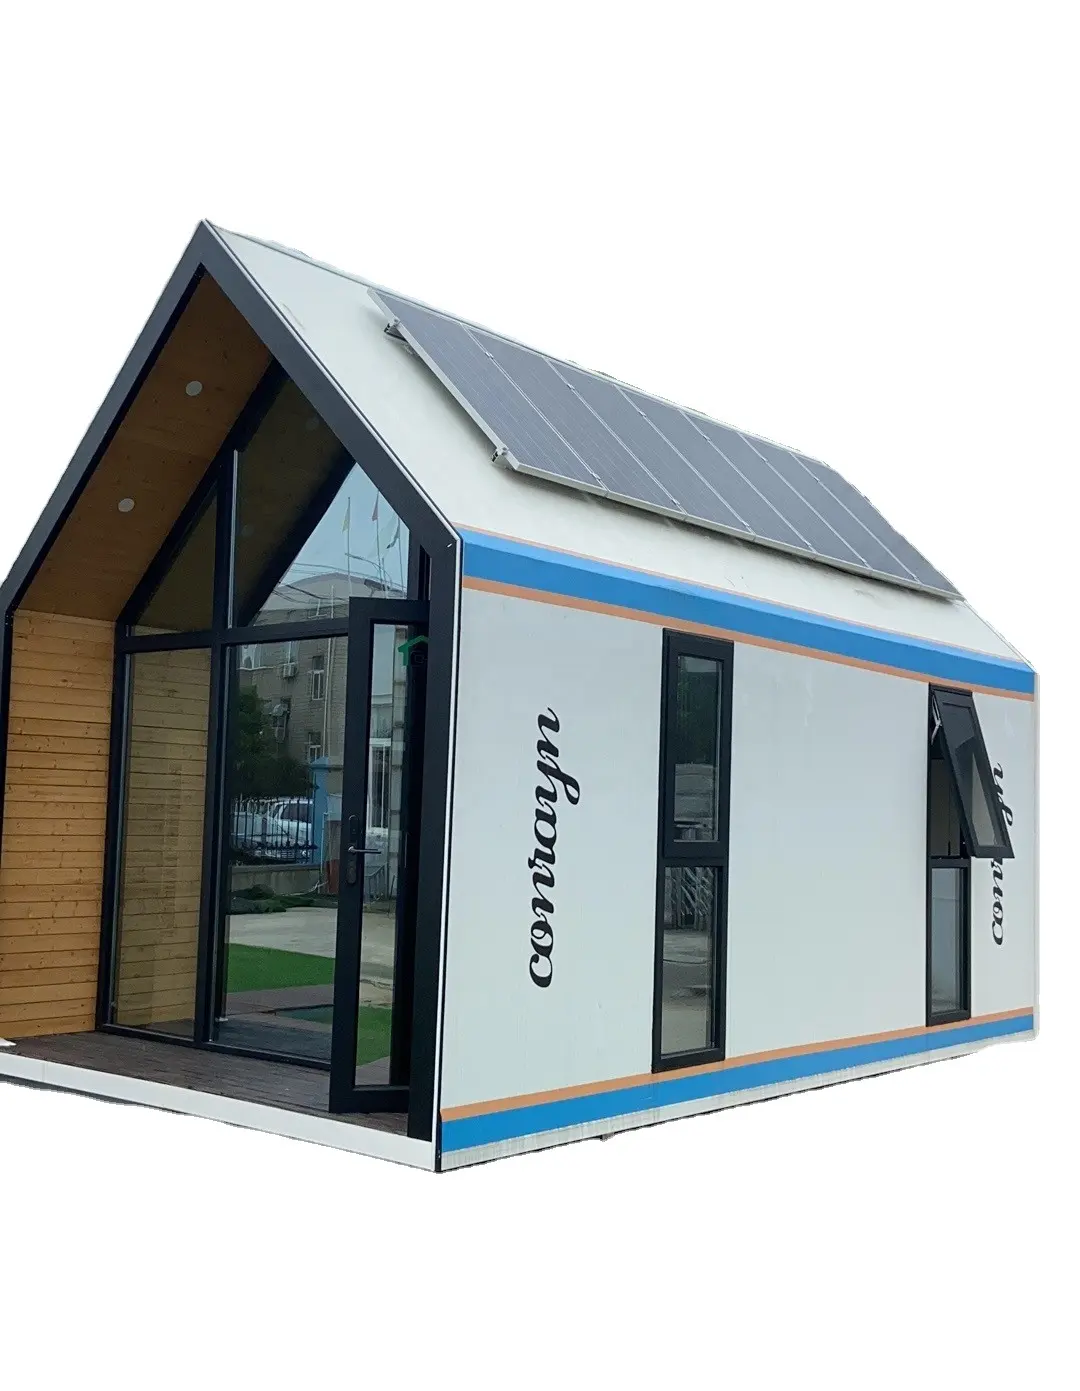 Outdoor Solar Mobile Houses Scenic Hotels Modular house Prefab House For Cultural Tourism And Roaming Residence